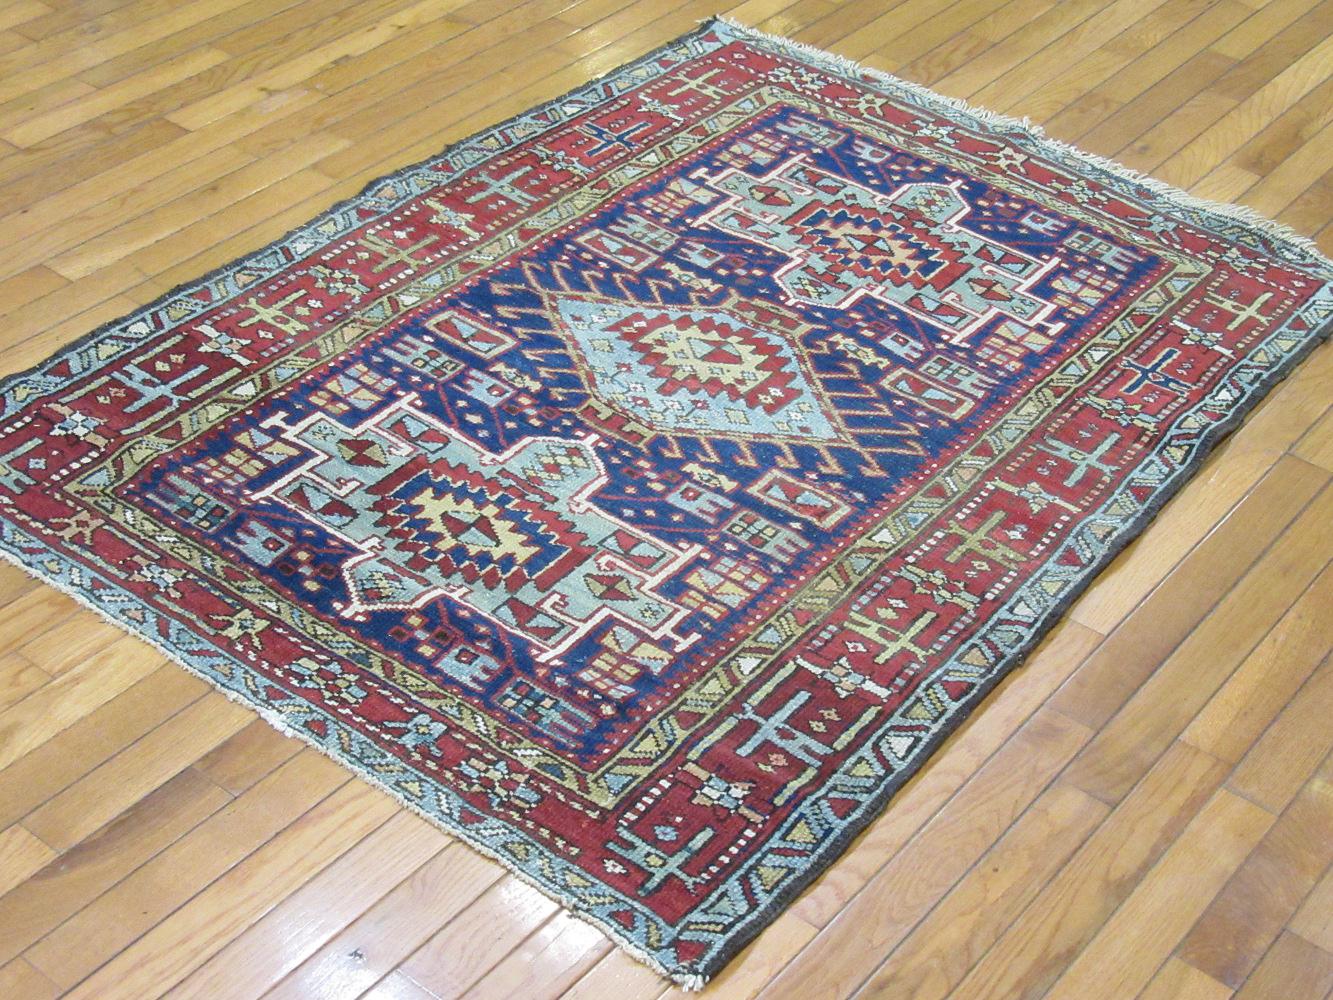 Small Antique Hand-Knotted Wool Persian Heriz Rug 1